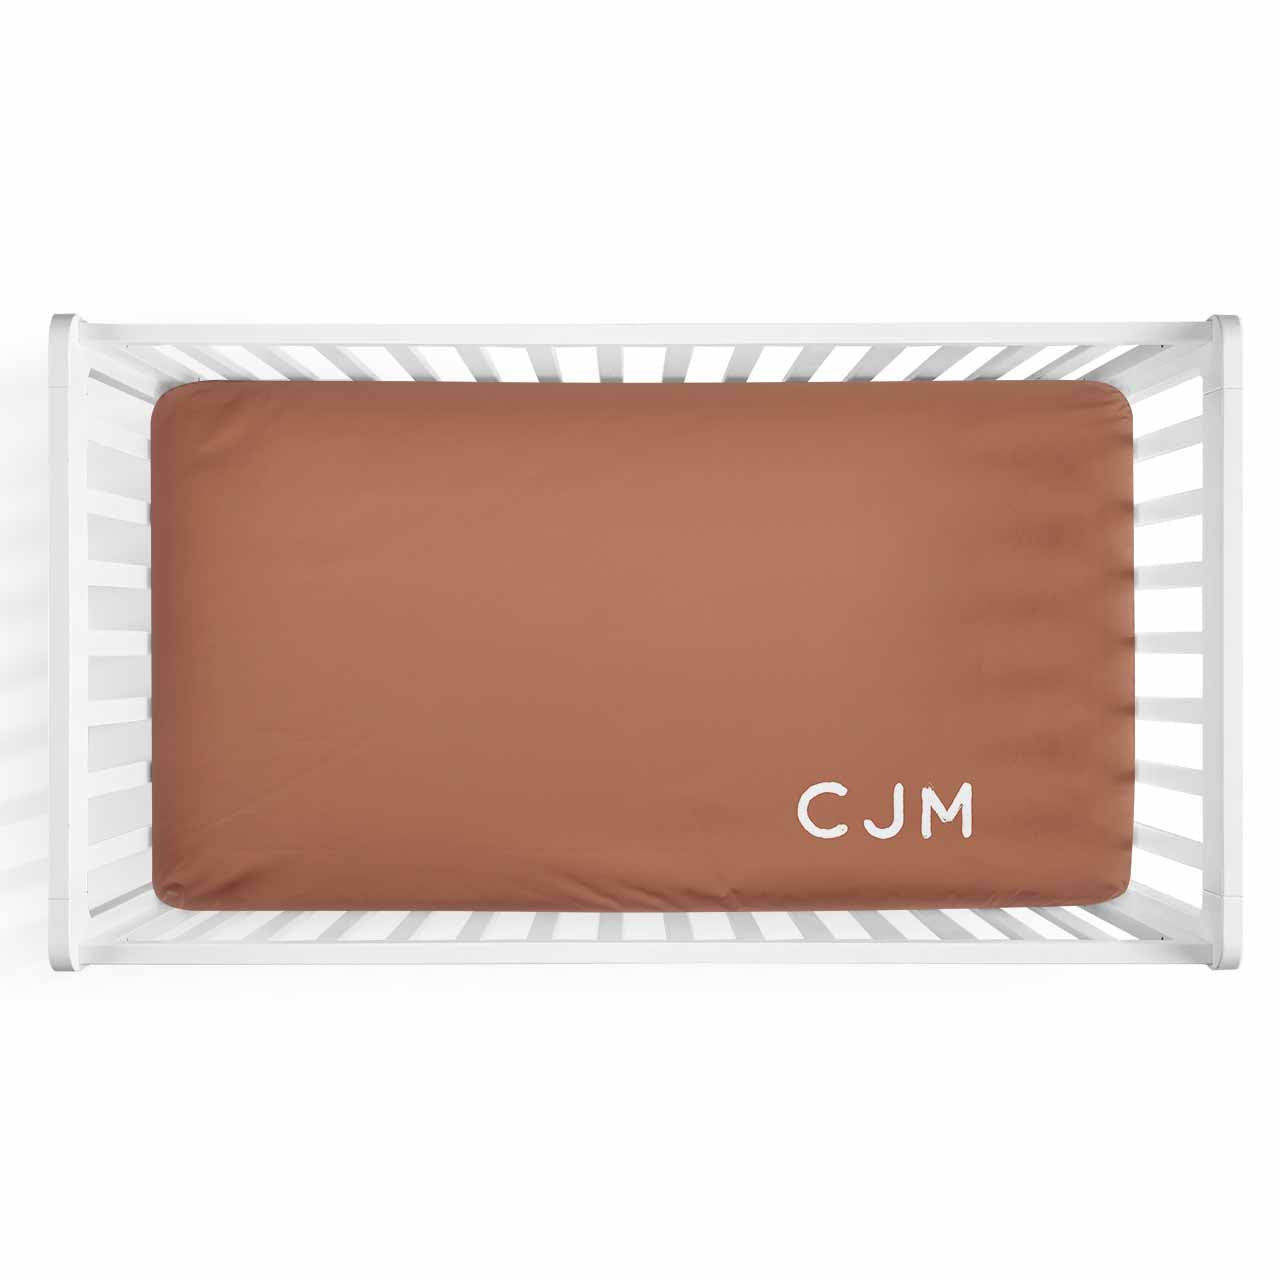 Personalized Baby Name Rust Color Jersey Knit Crib Sheet in Corner Initials Style